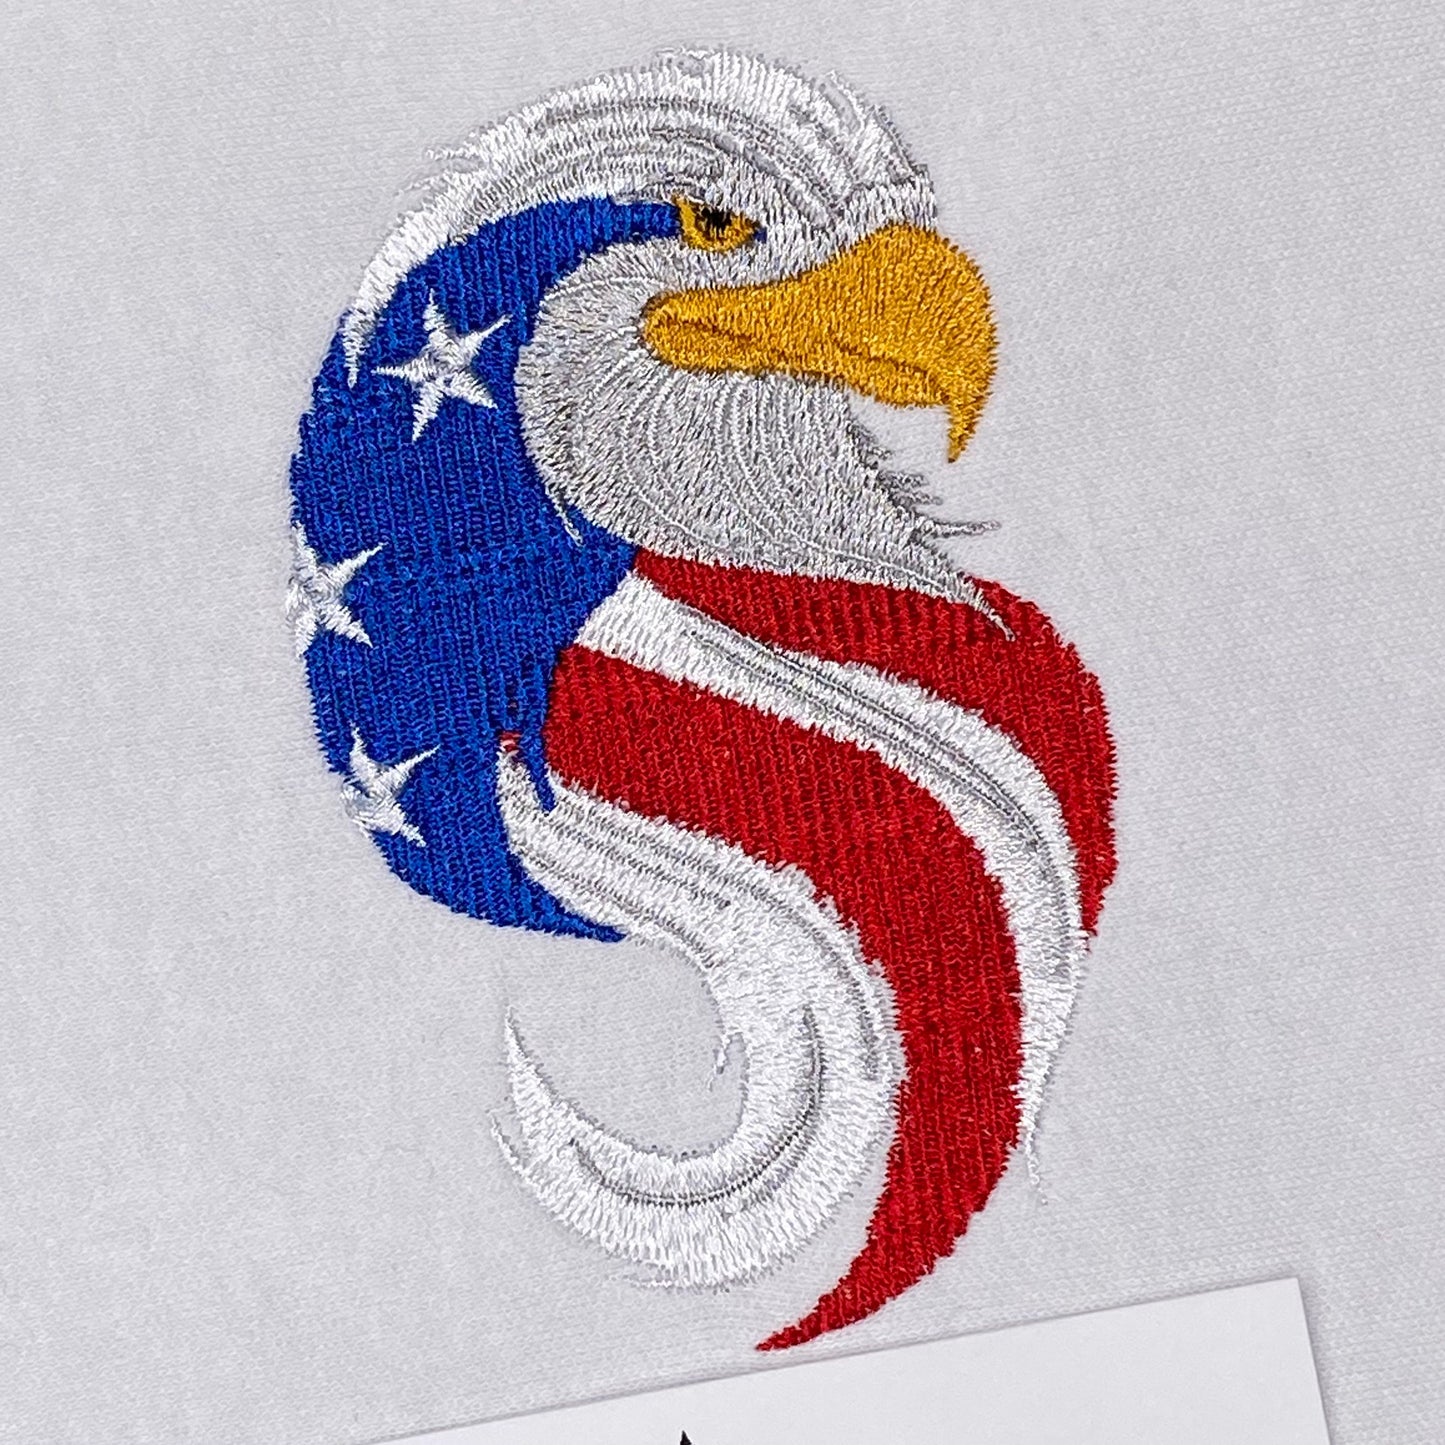 4th of July, America, All American, Eagle, Red White and Blue, Patriotic, Elections, Quincentennial, Embroidered T Shirt,